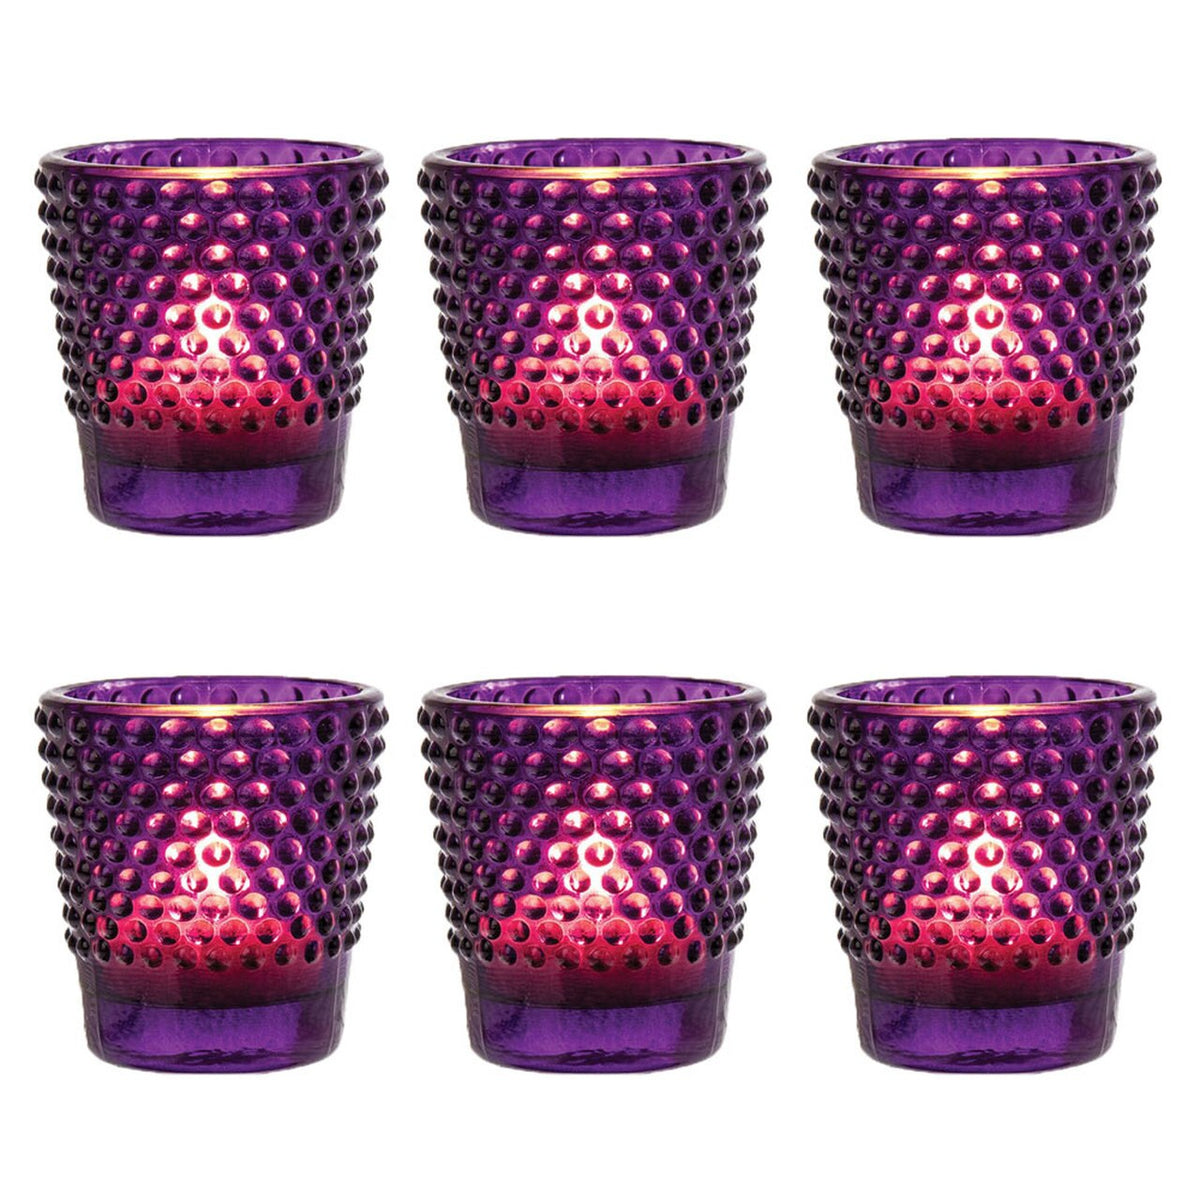 6 Pack | Vintage Hobnail Glass Candle Holder (2.25-Inches, Candace Design, Royal Purple) - For Use with Tea Lights - For Home Decor, Parties and Wedding Decorations - PaperLanternStore.com - Paper Lanterns, Decor, Party Lights &amp; More